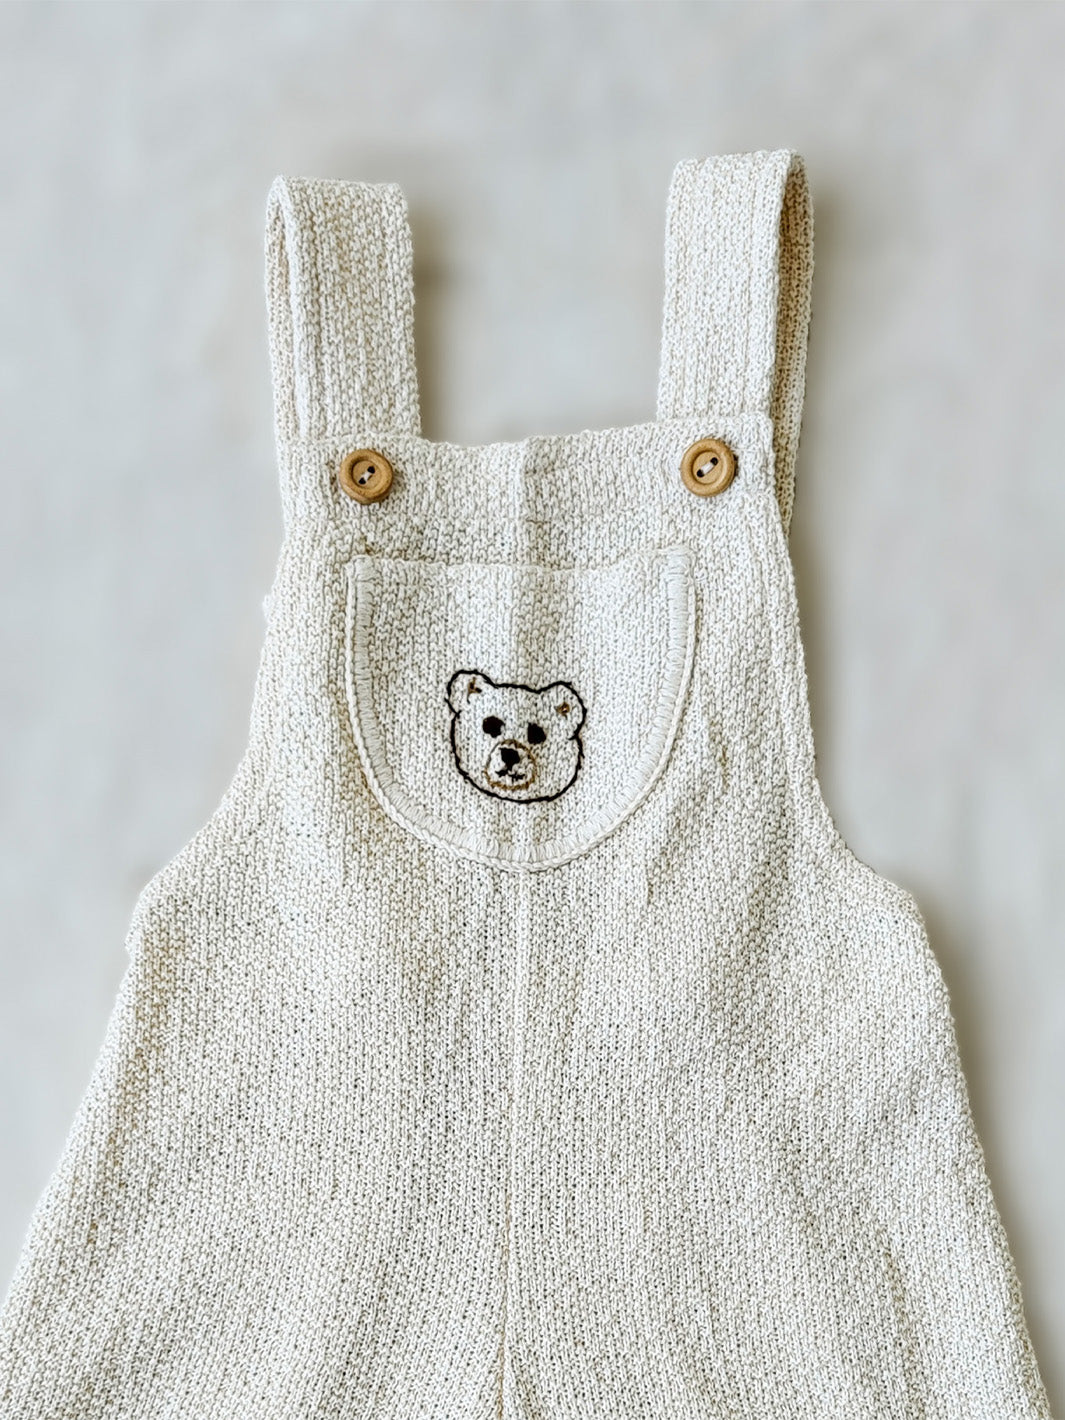 Liten Aventuris Collection. Keep your little one comfy and feeling like a bear cub in this Mico Overall! Crafted in natural knitted cotton with wooden buttons on the straps and a hand-embroidered bear on the front. The Mica overall has an elasticated leg opening for 1-Year-olds and a loose leg opening for bigger sizes. Plus one pocket for any tiny treasures. Perfect for boys and girls. Barnkläder, Bomullskläder, Natural kläder Hängselbyxor.